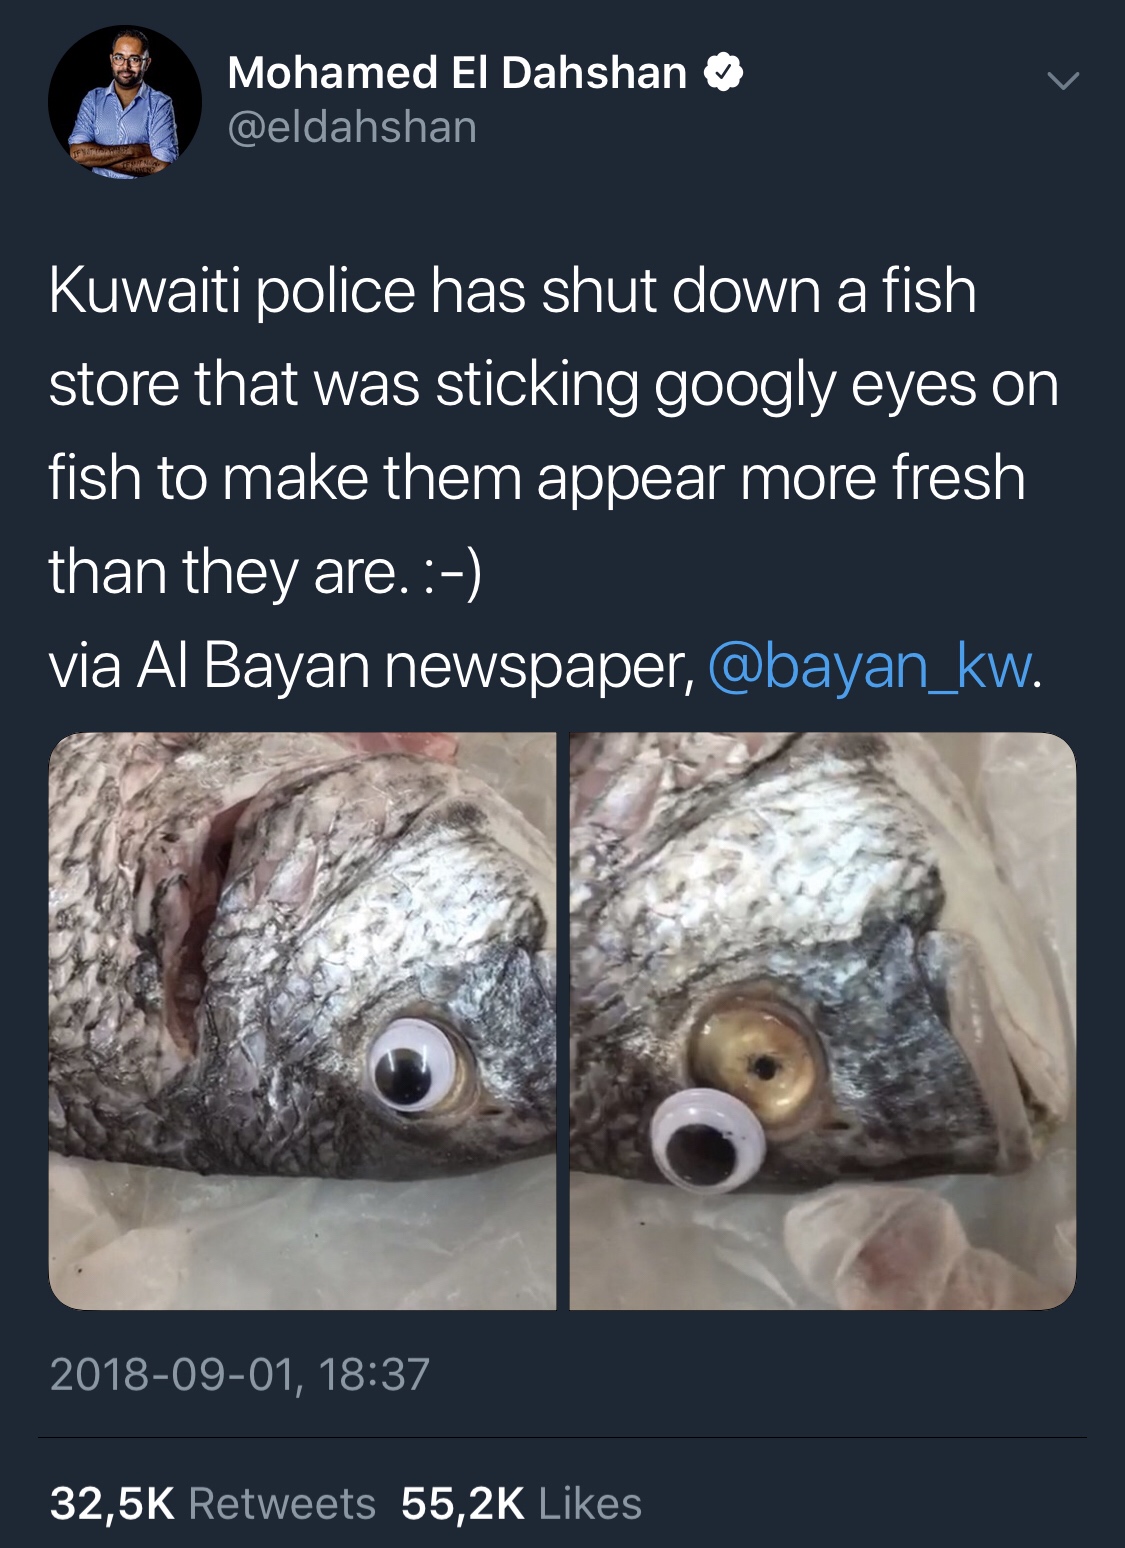 kuwaiti fish googly eyes - Mohamed El Dahshan Kuwaiti police has shut down a fish store that was sticking googly eyes on fish to make them appear more fresh than they are. via Al Bayan newspaper, . ,